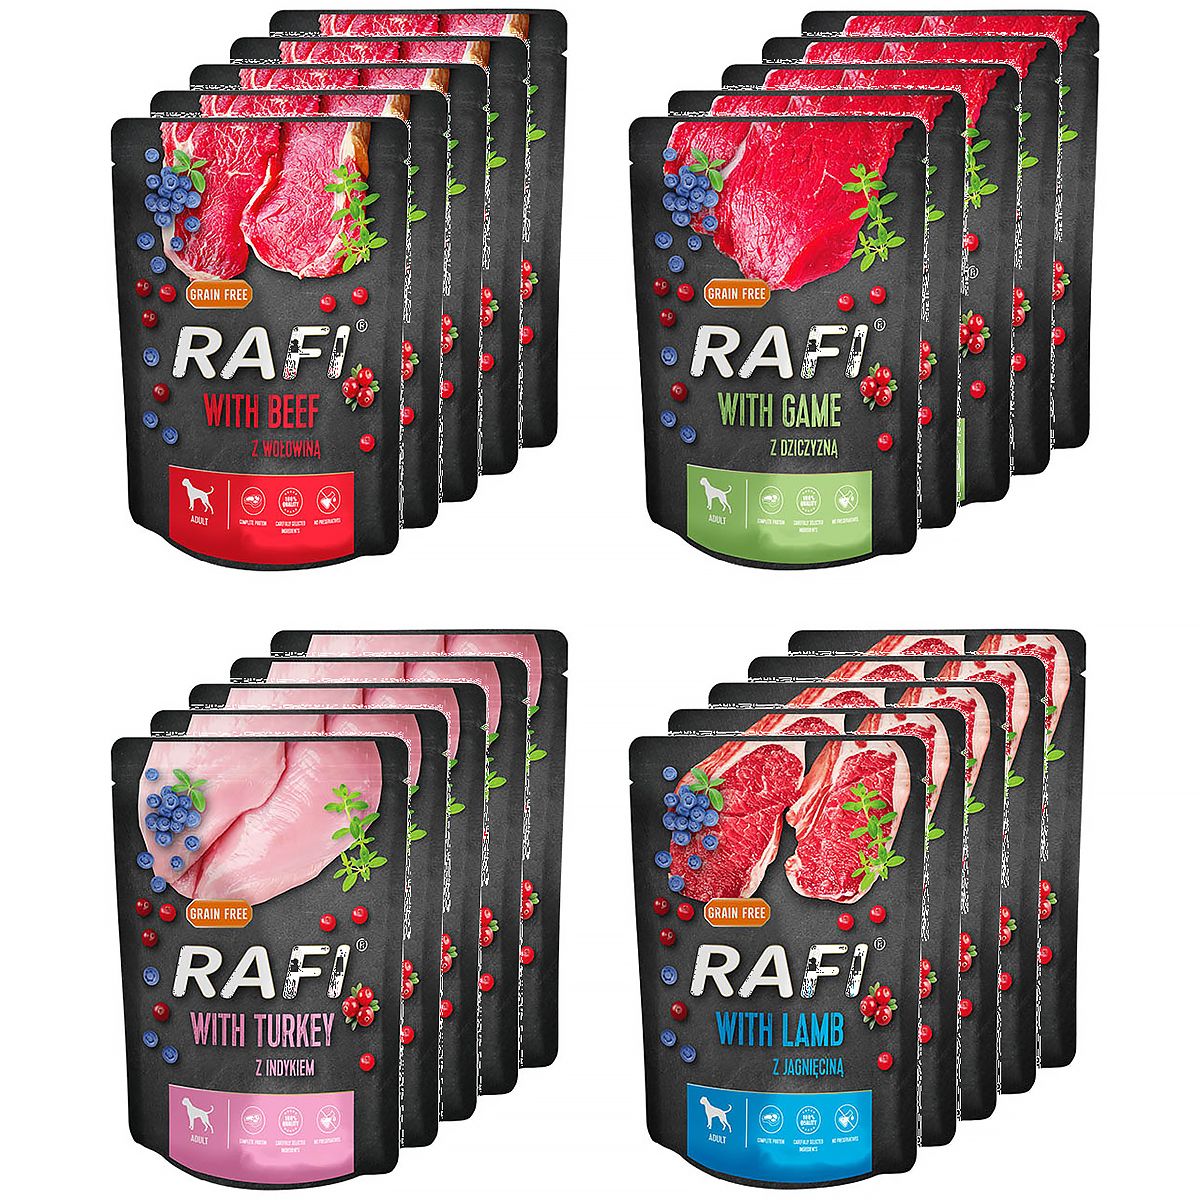 +rafi food+>Rafi food is <strong>a wholesome, balanced meal for your pet</strong>. It is designed for all dogs of different sizes and breeds. It can also be used as a supplementary meal. Due to its taste, it is eagerly eaten by pets. <p>Dog food in sachets is <strong>a convenient form of giving meals to your pet</strong>. There is no need to spoon the food as it is very easy to squeeze out of the sachet.  </p><p><strong>Cheap and good dog food </strong> has a valuable composition that has a positive effect on the overall physical condition and health of pets. Dog food is grain-free. It contains unsaturated fatty acids, which affect the condition of the skin and improve the appearance of the coat.  The high content of vitamins and minerals makes the animals that eat Rafi healthy and full of energy. </p><p><strong>Grain-free dog food</strong> does not contain preservatives or additional dyes that improve taste and stimulate appetite. The palatability of dog food is due to the <strong>additives in the form of natural fruits</strong>, which increase the attractiveness of your pet's meal.  </p><p><strong>Ingredients:</strong></p><ul><li><strong>RAFI food with</strong> beef, blueberry and cranberries - meat and animal derivatives 65% (beef 4%), fruit (blueberry 2%, cranberry 2%), minerals, oils and fats (linseed oil 0.2%), dried thyme 0.01%. </li><strong><li>RAFI feed with lamb, blueberry and cranberry </strong>- meat and animal derivatives 65% (lamb meat 4%), fruit (blueberry 2%, cranberry 2%), minerals, oils and fats (linseed oil 0.2%), dried thyme 0.01%. </li><li><strong>RAFI feed with venison, blueberry </strong> and cranberry - meat and animal derivatives 65% (venison meat 4%), fruit (blueberry 2%, cranberry 2%), minerals, oils and fats (linseed oil 0.2%), dried thyme 0.01%. </;o><strong><li>RAFI feed with turkey, blueberries and cranberries </strong> - meat and animal derivatives 65% (turkey meat 4%), fruit (blueberry 2%, cranberries 2%), minerals, oils and fats (linseed oil 0.2%), dried thyme 0.01%. </li></div></div></div>   <div class=